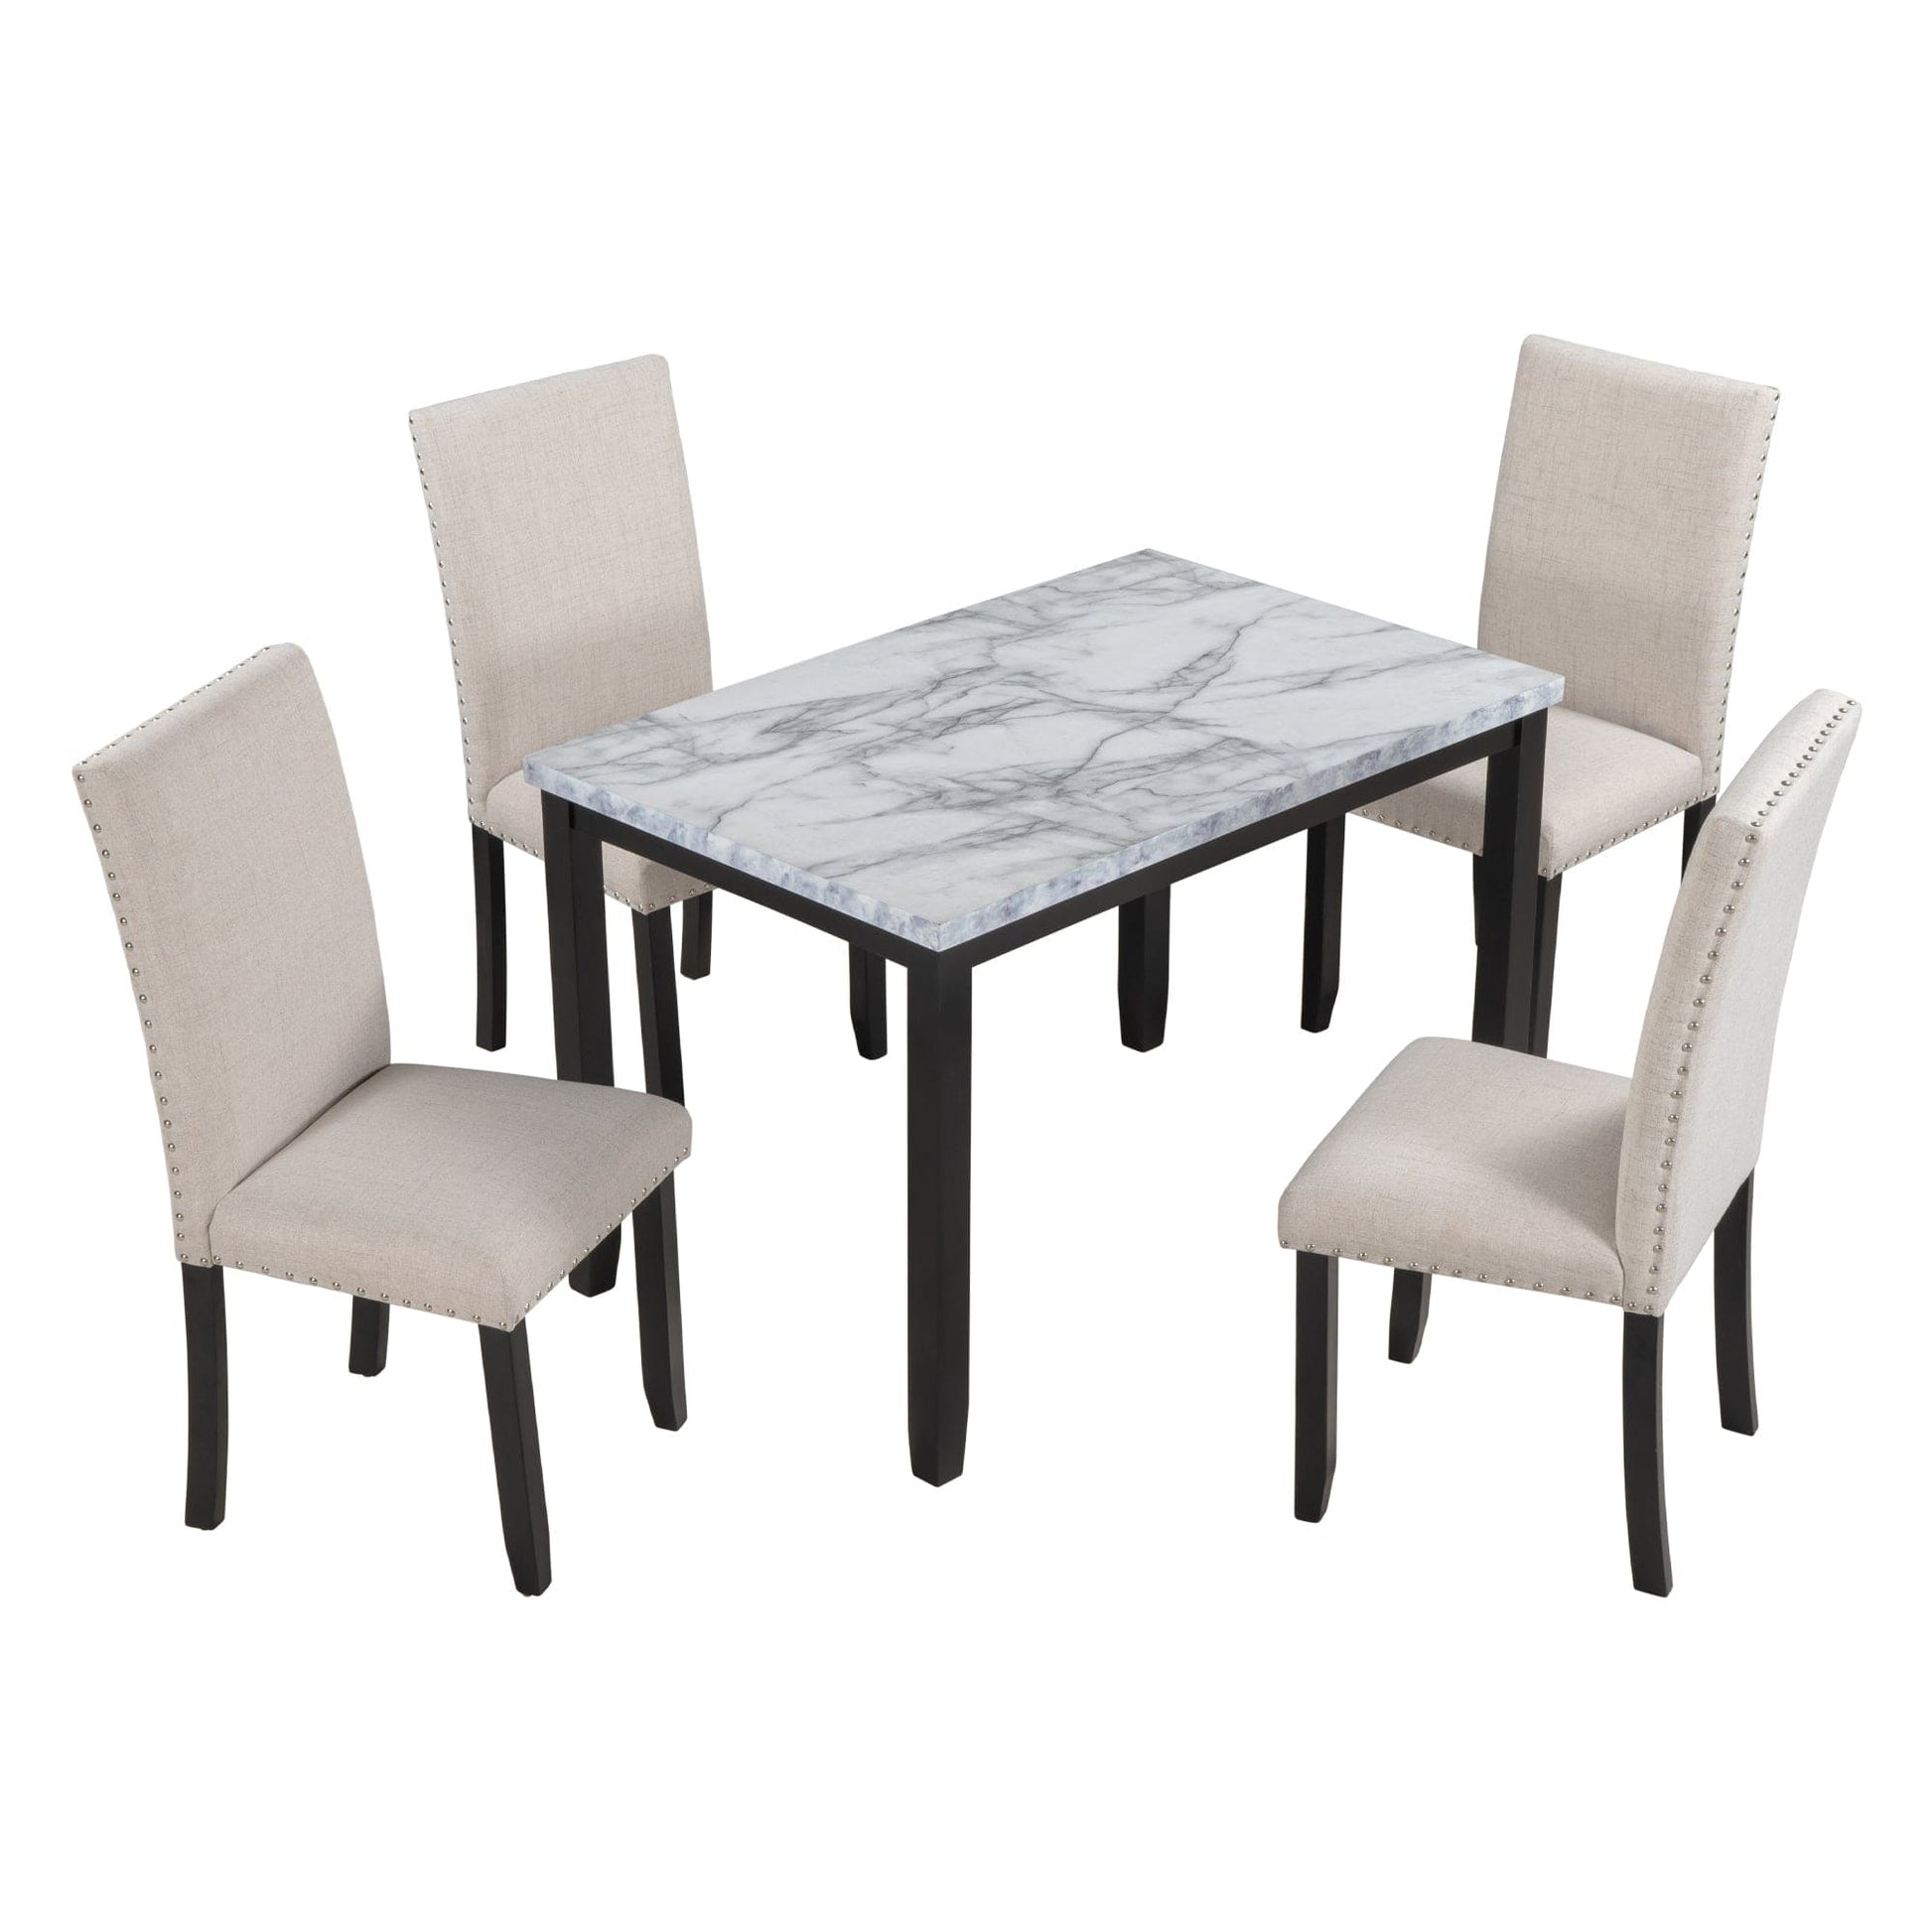 1st Choice Furniture Direct Dining Set 1st Choice Sleek 5-Piece Dining Set with Marble Table, 4 Cushion Chair